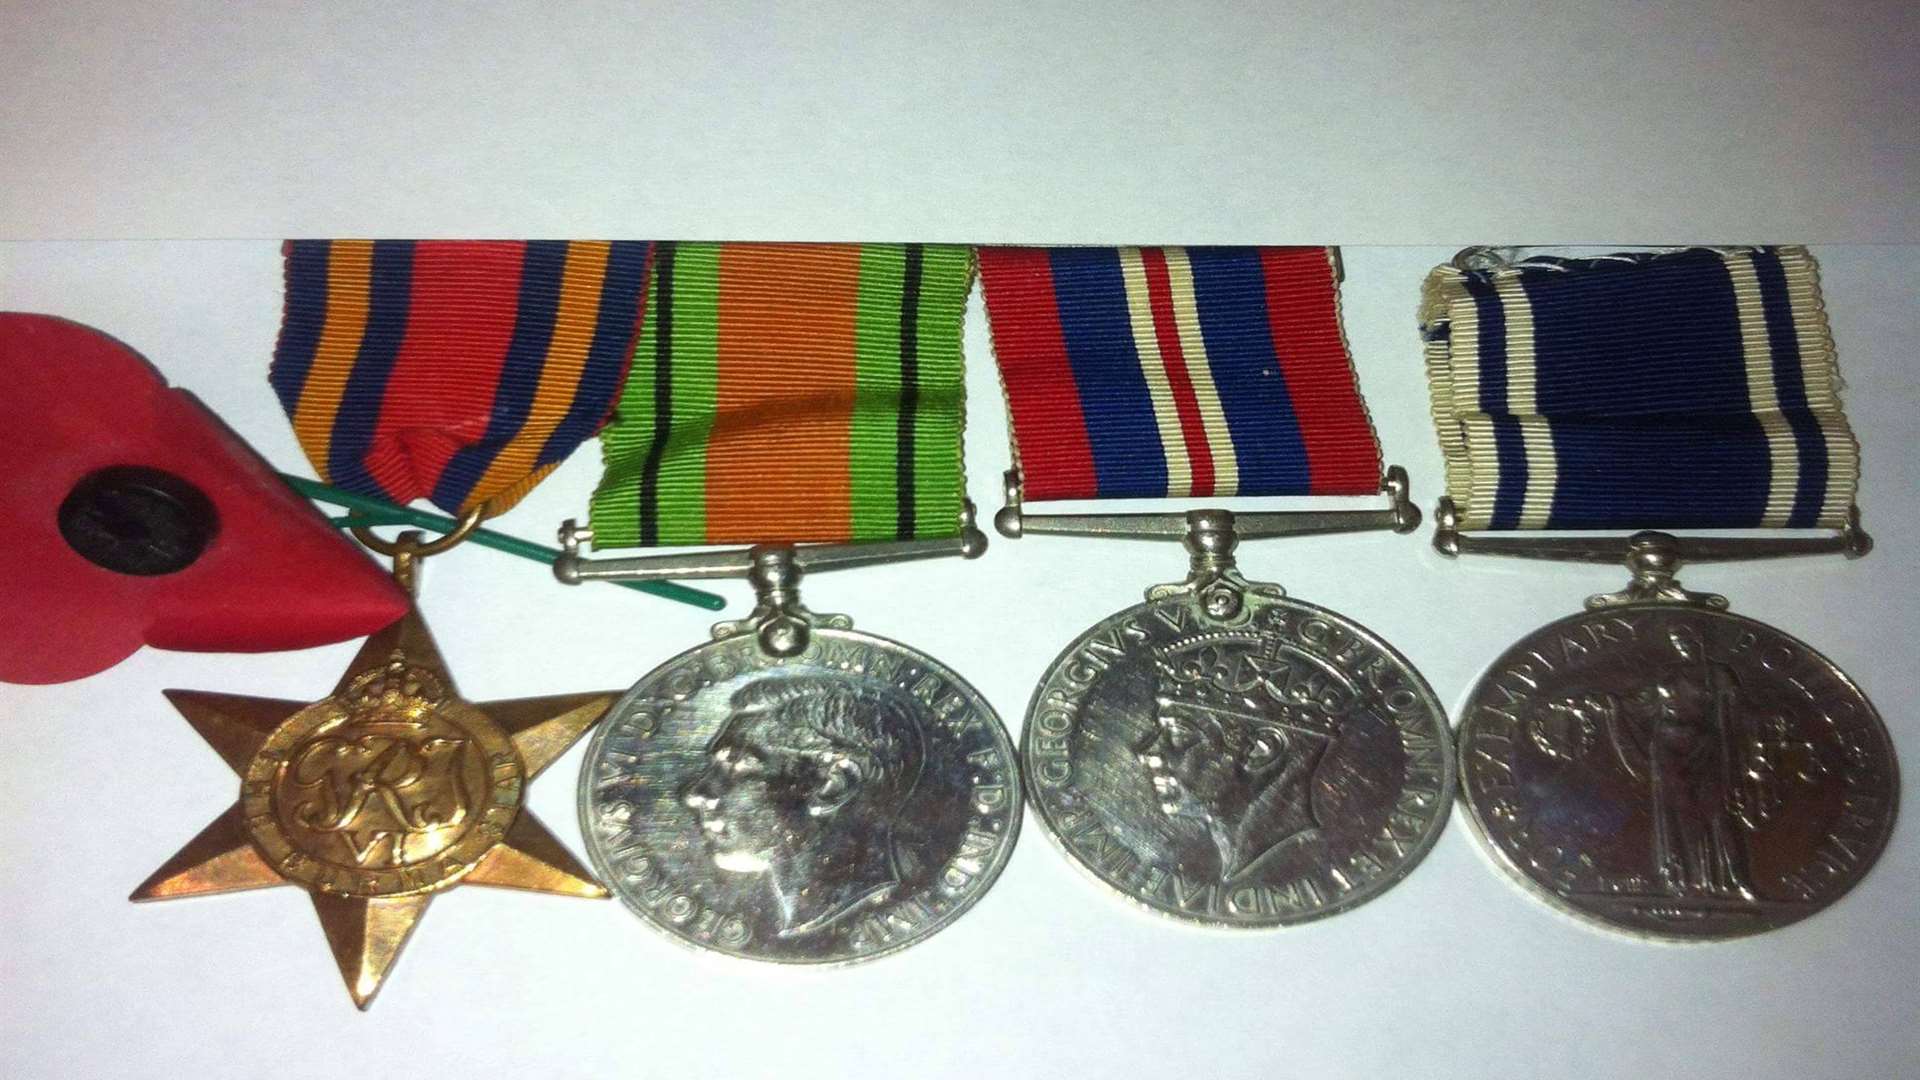 Four medals belonging to Phil's late father Charles Chislet